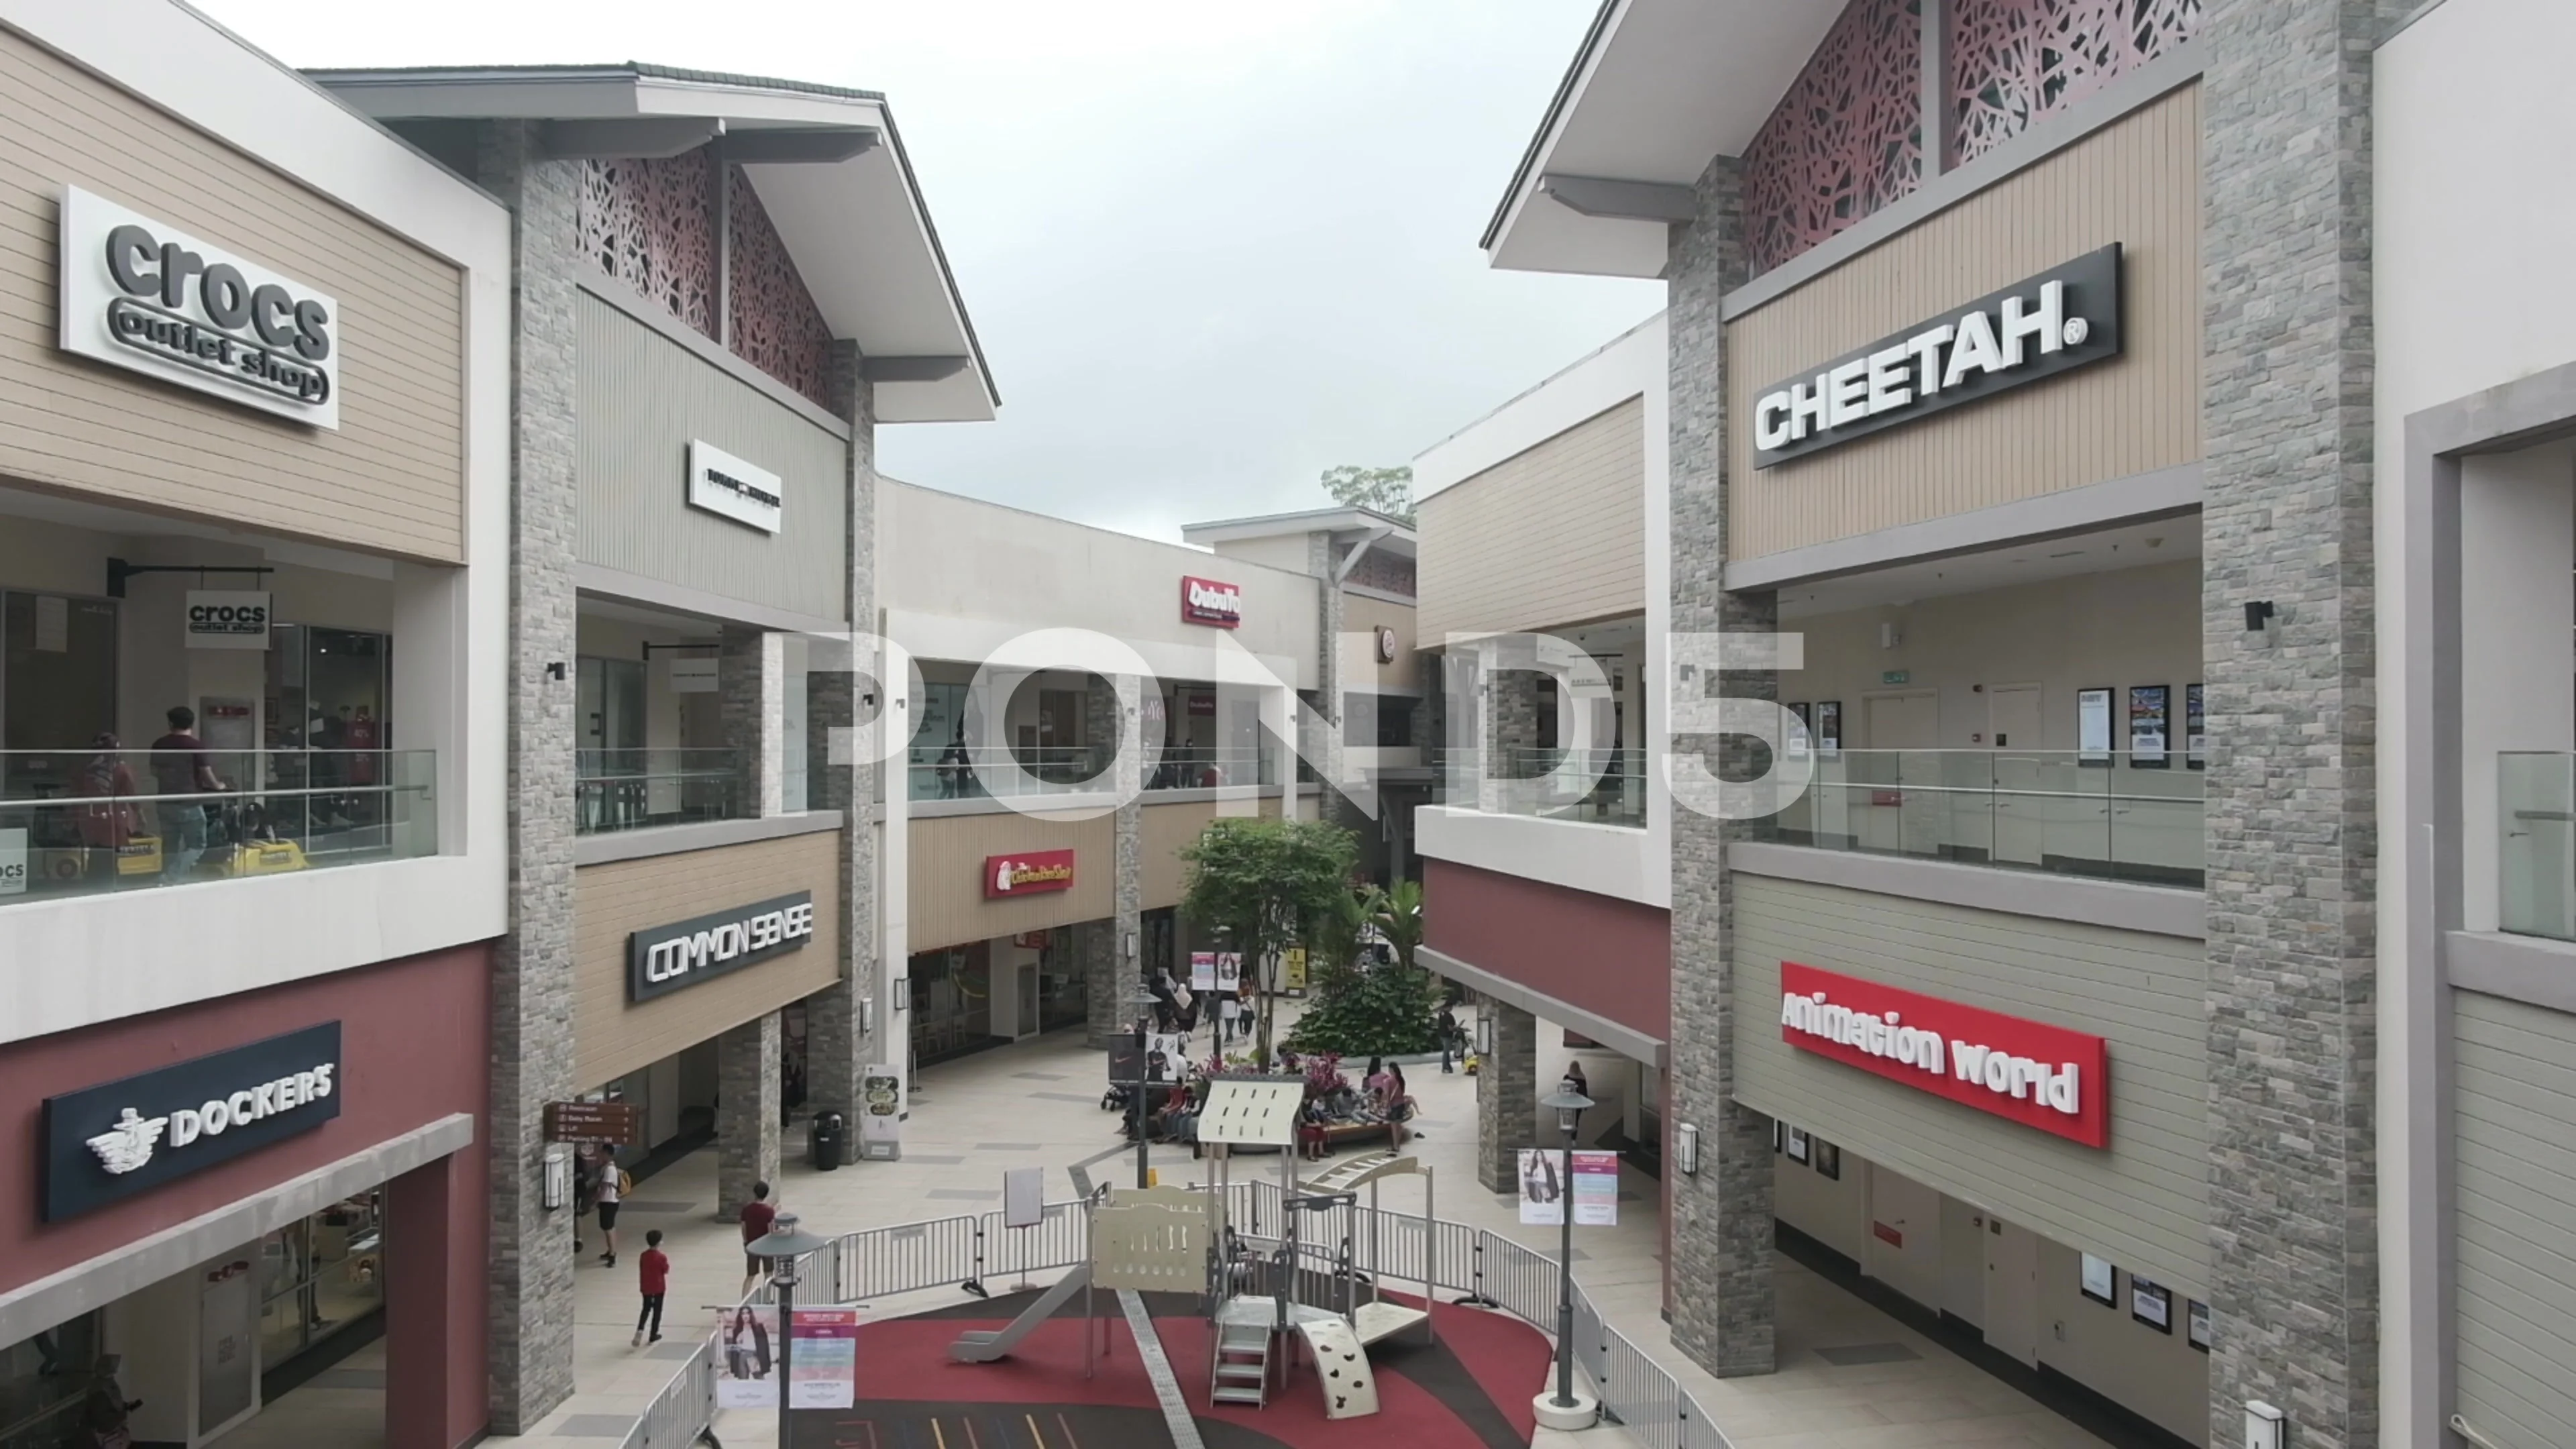 Genting Highlands Premium Outlets FINALLY Opens With Over 150 Designer  Brand Stores! - WORLD OF BUZZ